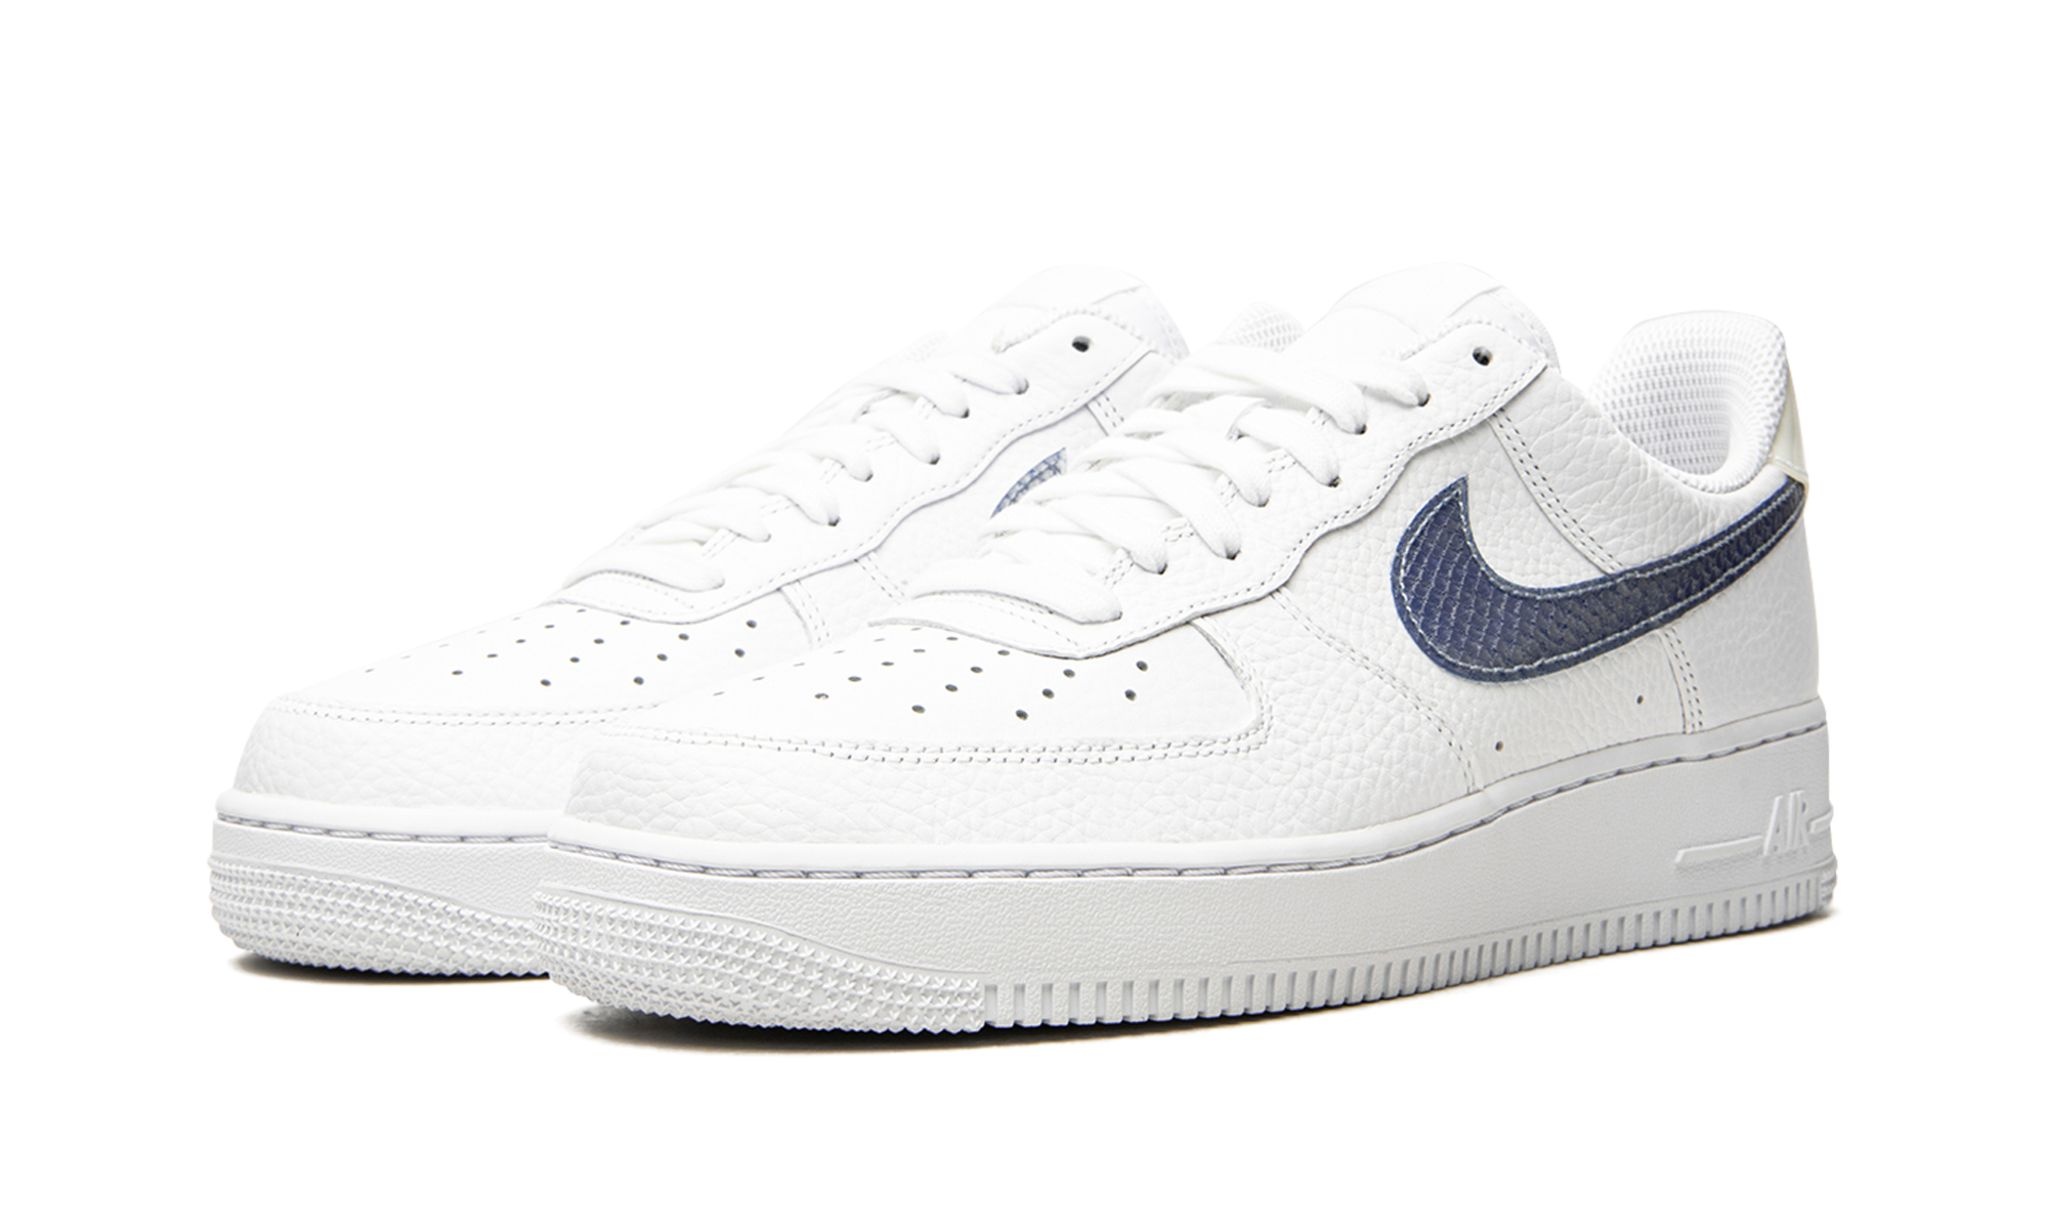 Air Force 1 Low "Blue Snakeskin" - 2